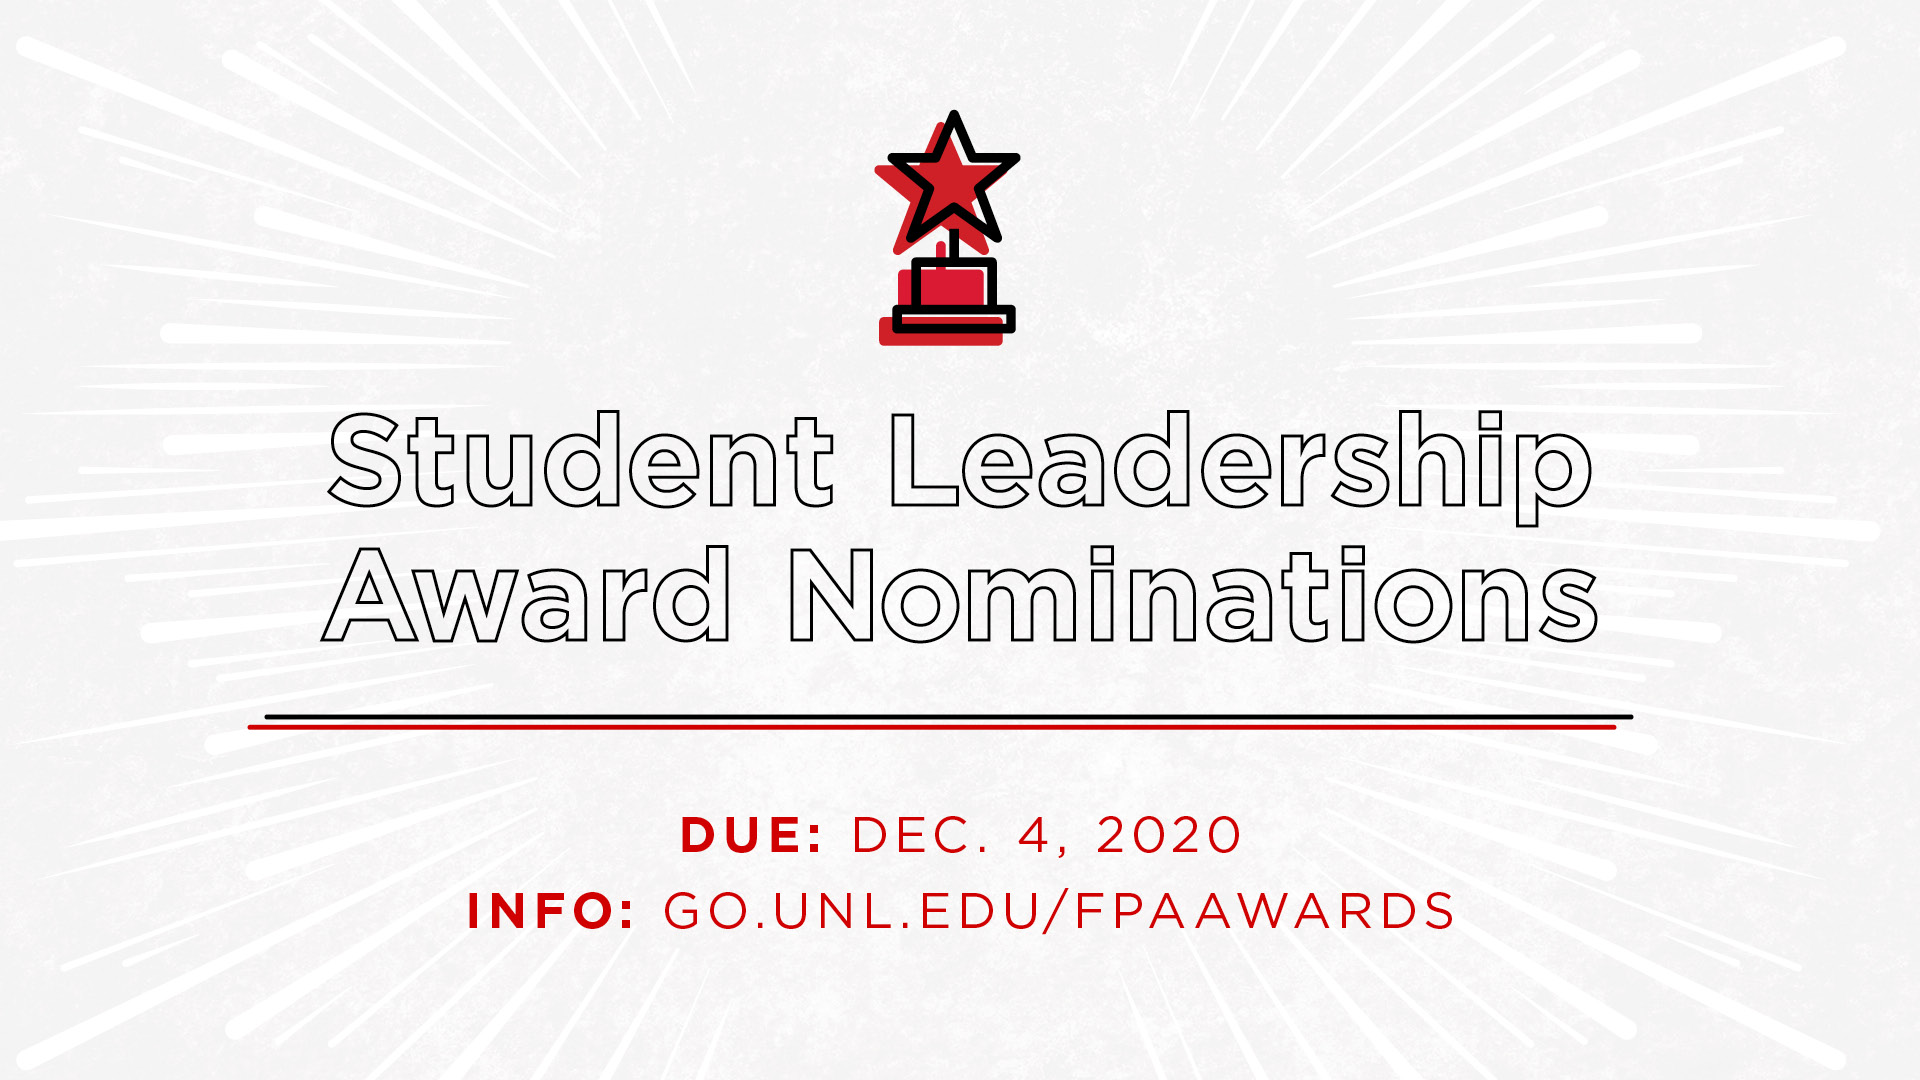 Student Leadership Award nominations are due on Friday, Dec. 4.